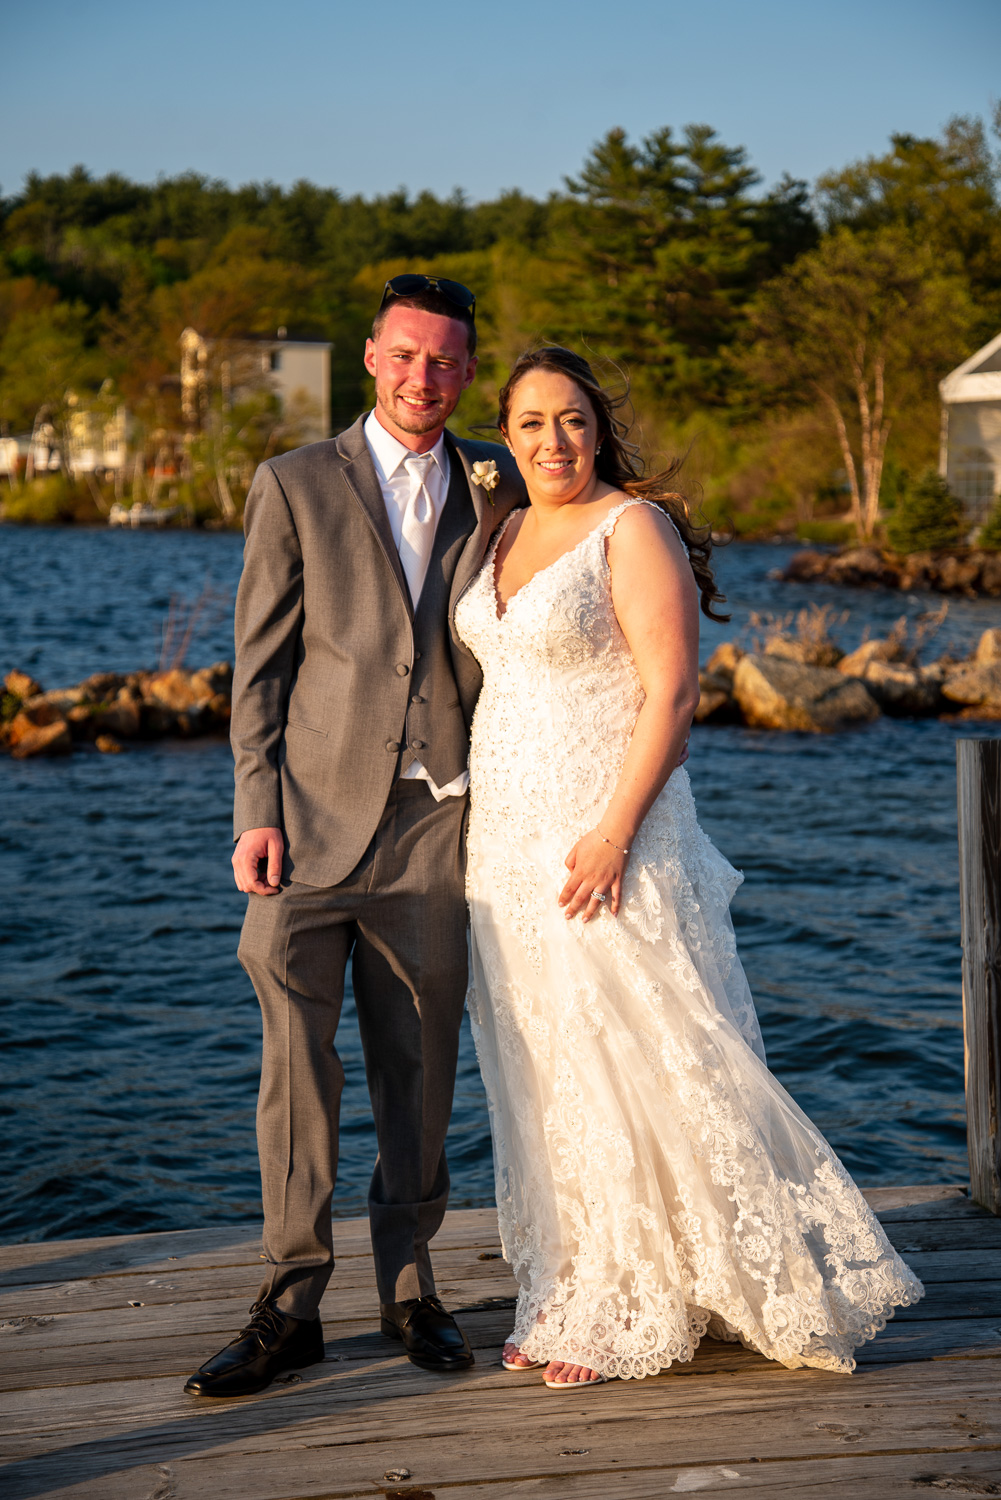 Bride and groom standing on a dock at the lakeside wedding